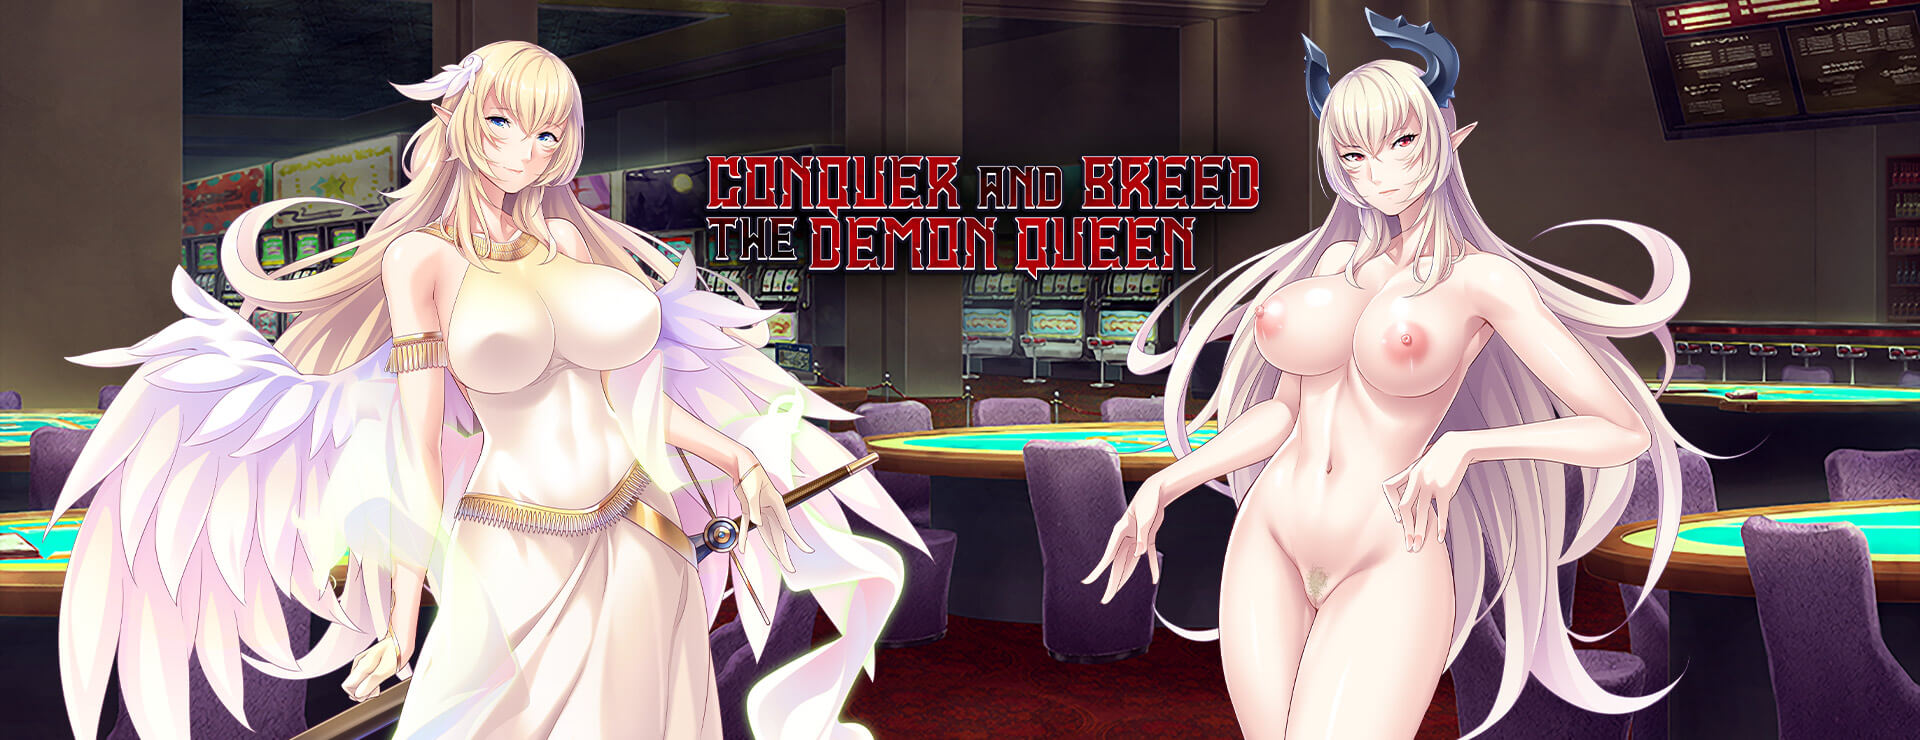 Premium Hentai Game 'Conquer and Breed the Demon Queen'